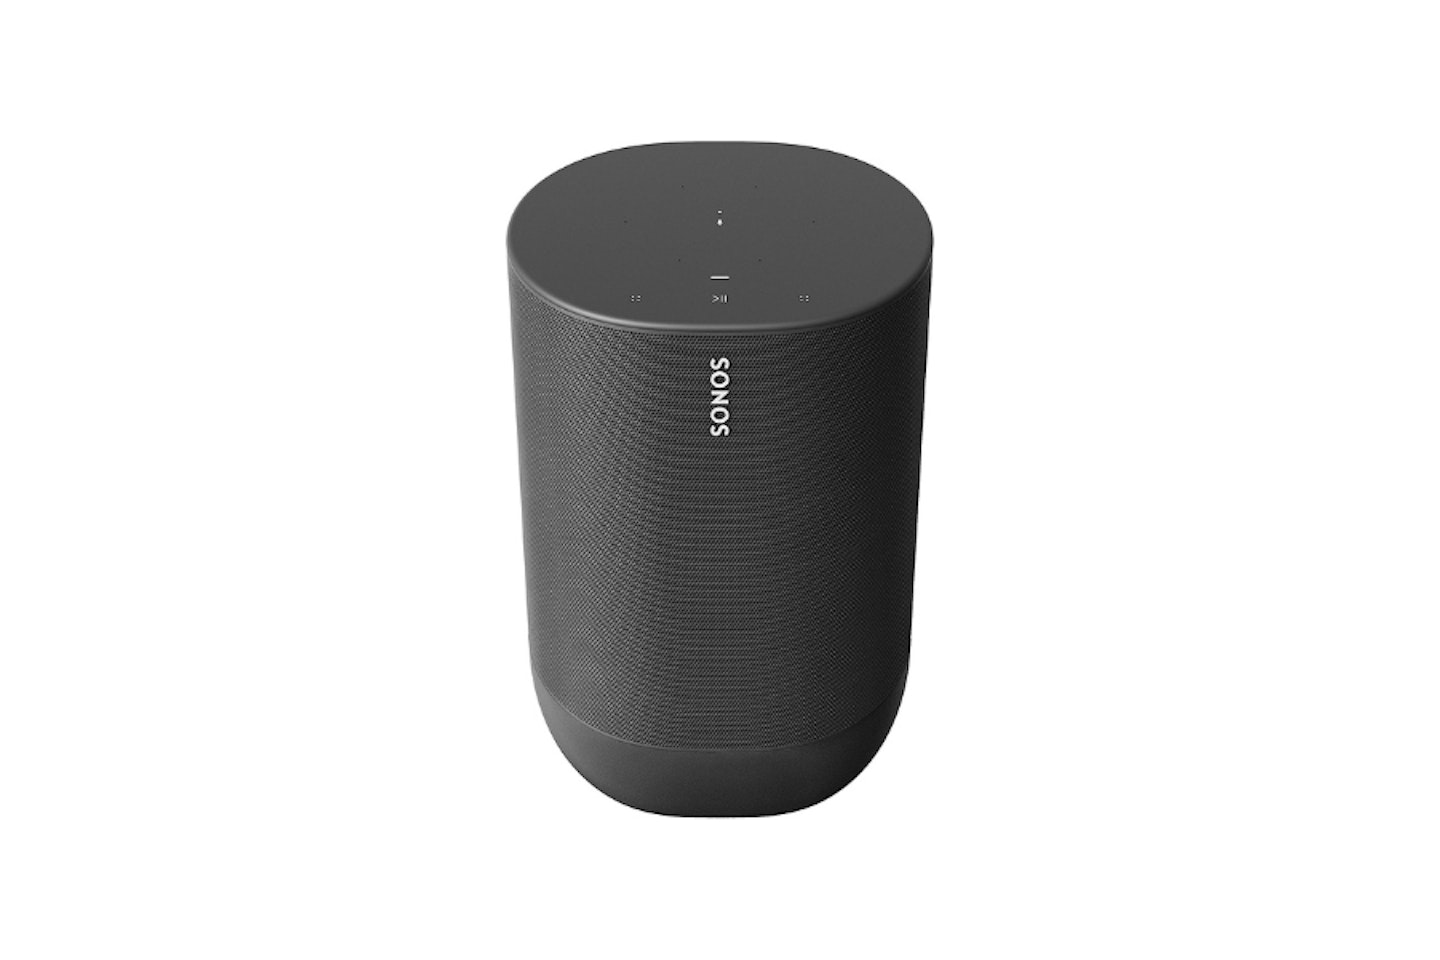 Sonos Move - The durable, battery-powered Smart Speaker